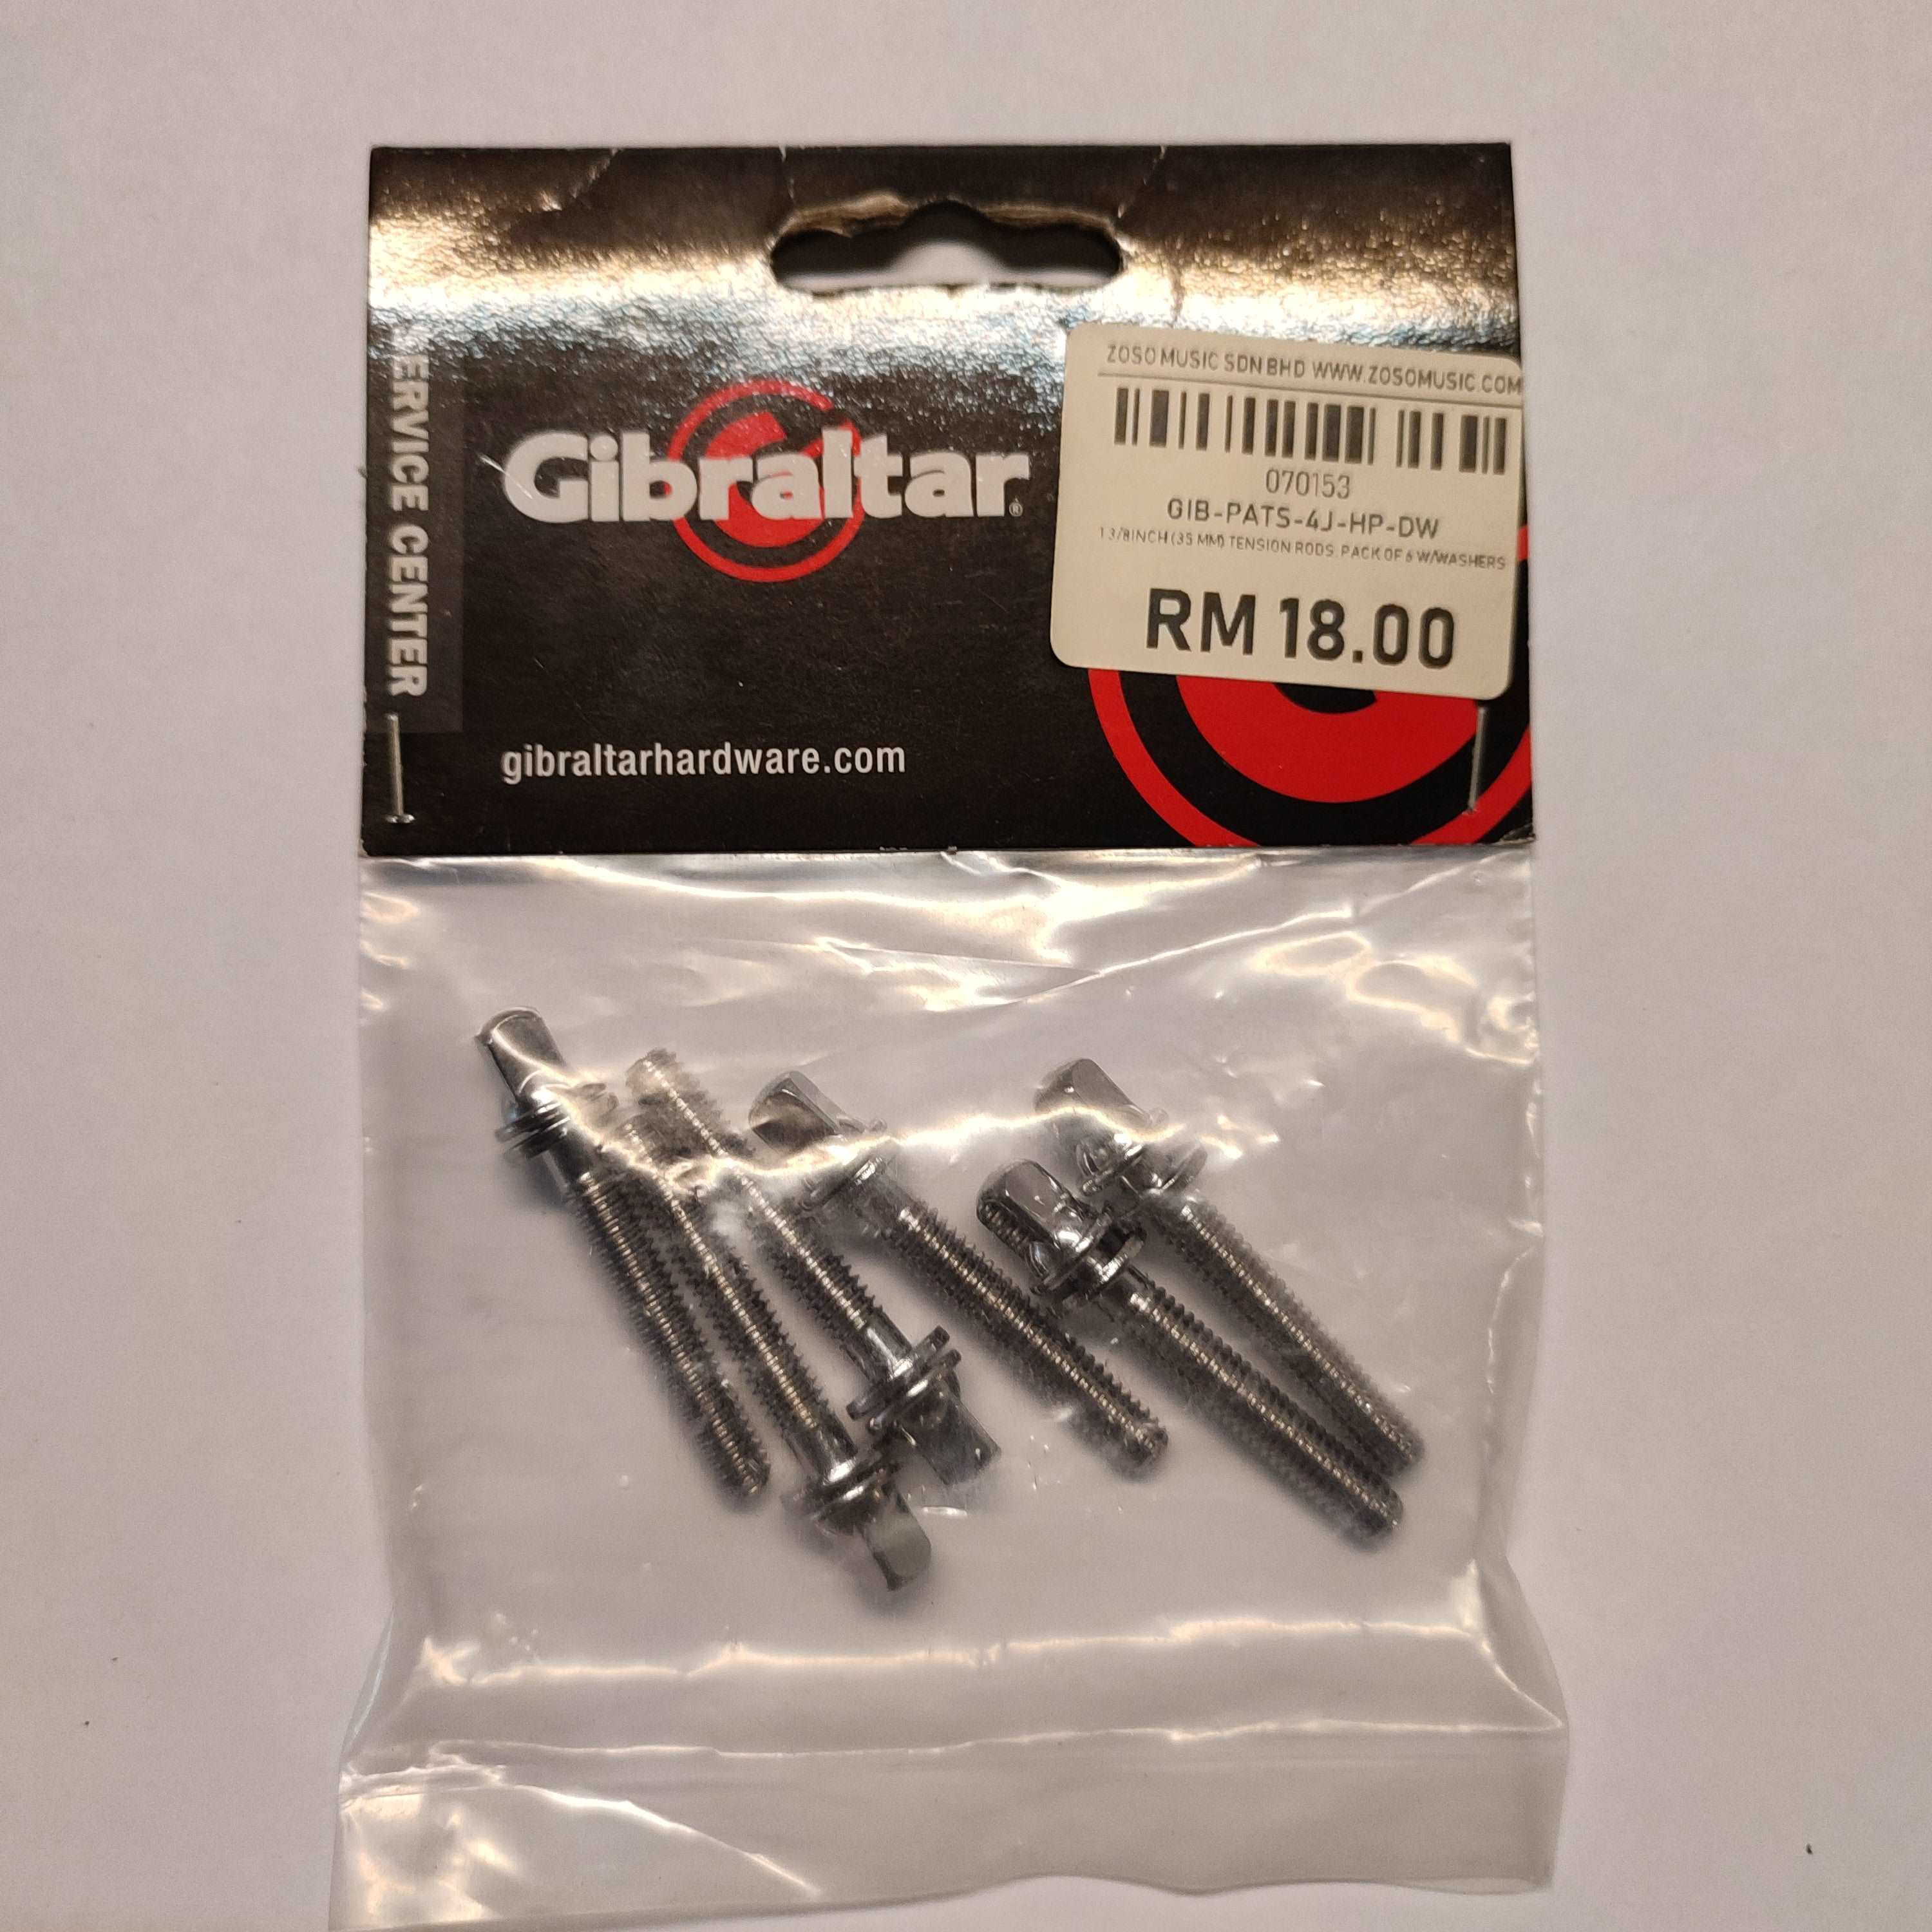 DISPLAY CLEARANCE - GIBRALTAR SC-4J 1 3/8INCH (35 MM) TENSION RODS, PACK OF 6 W/WASHERS | GIBRALTAR , Zoso Music